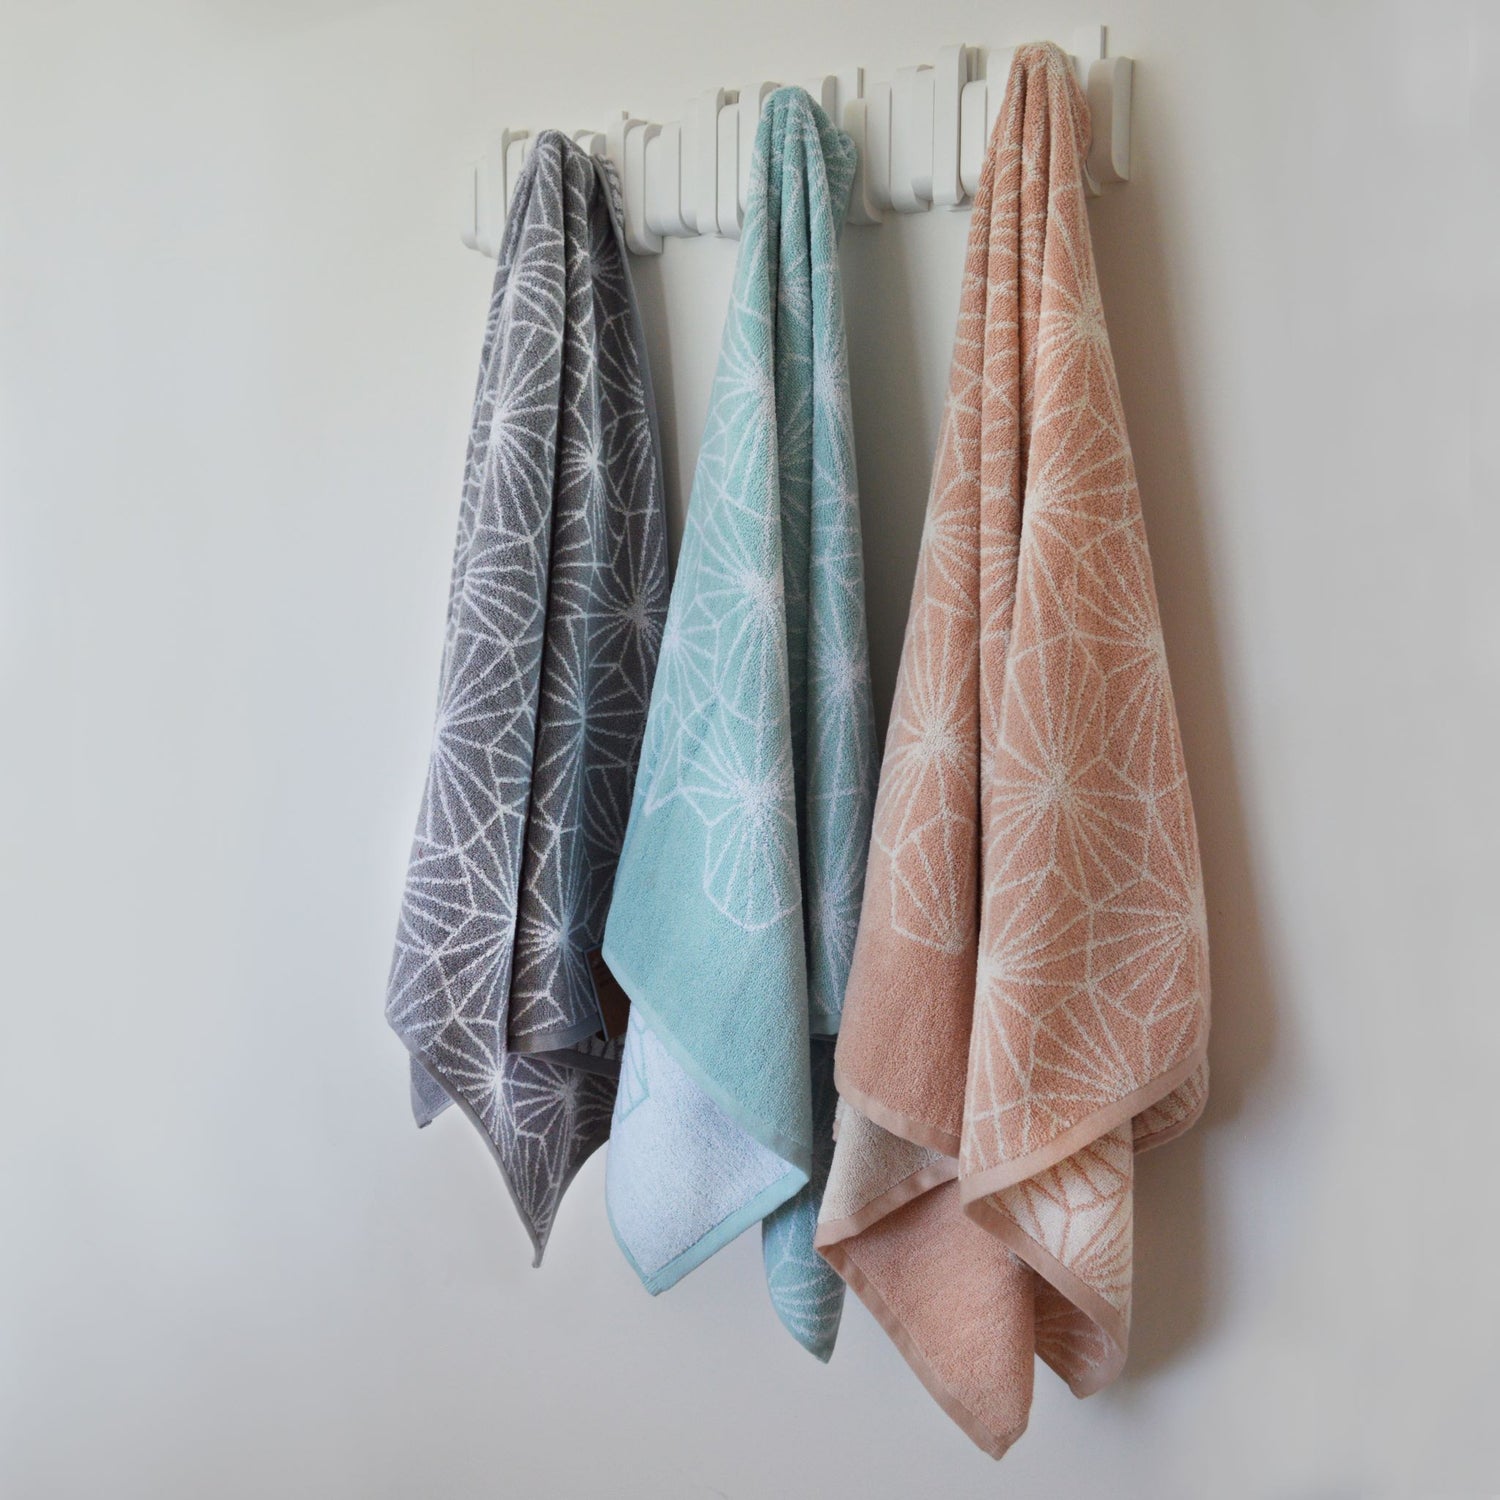 Country house jacquard towels